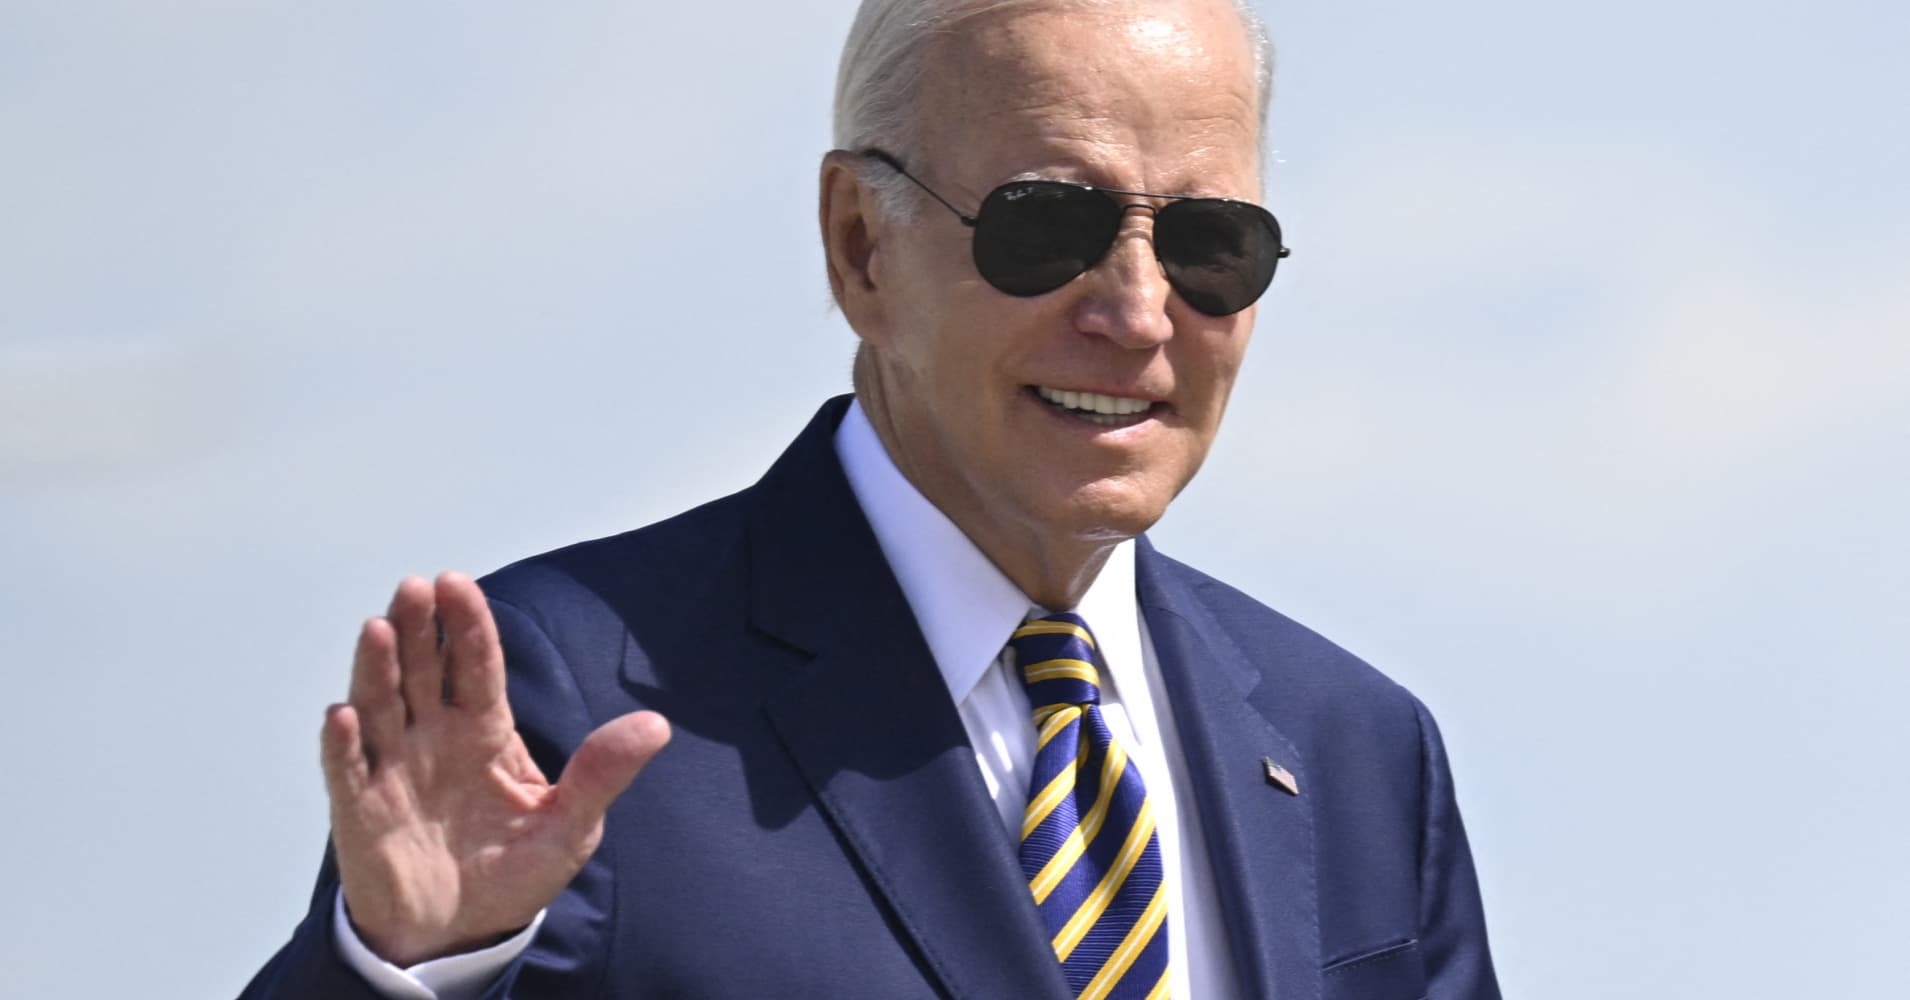 biden has forgiven $136 billion in student debt. more relief is on the way